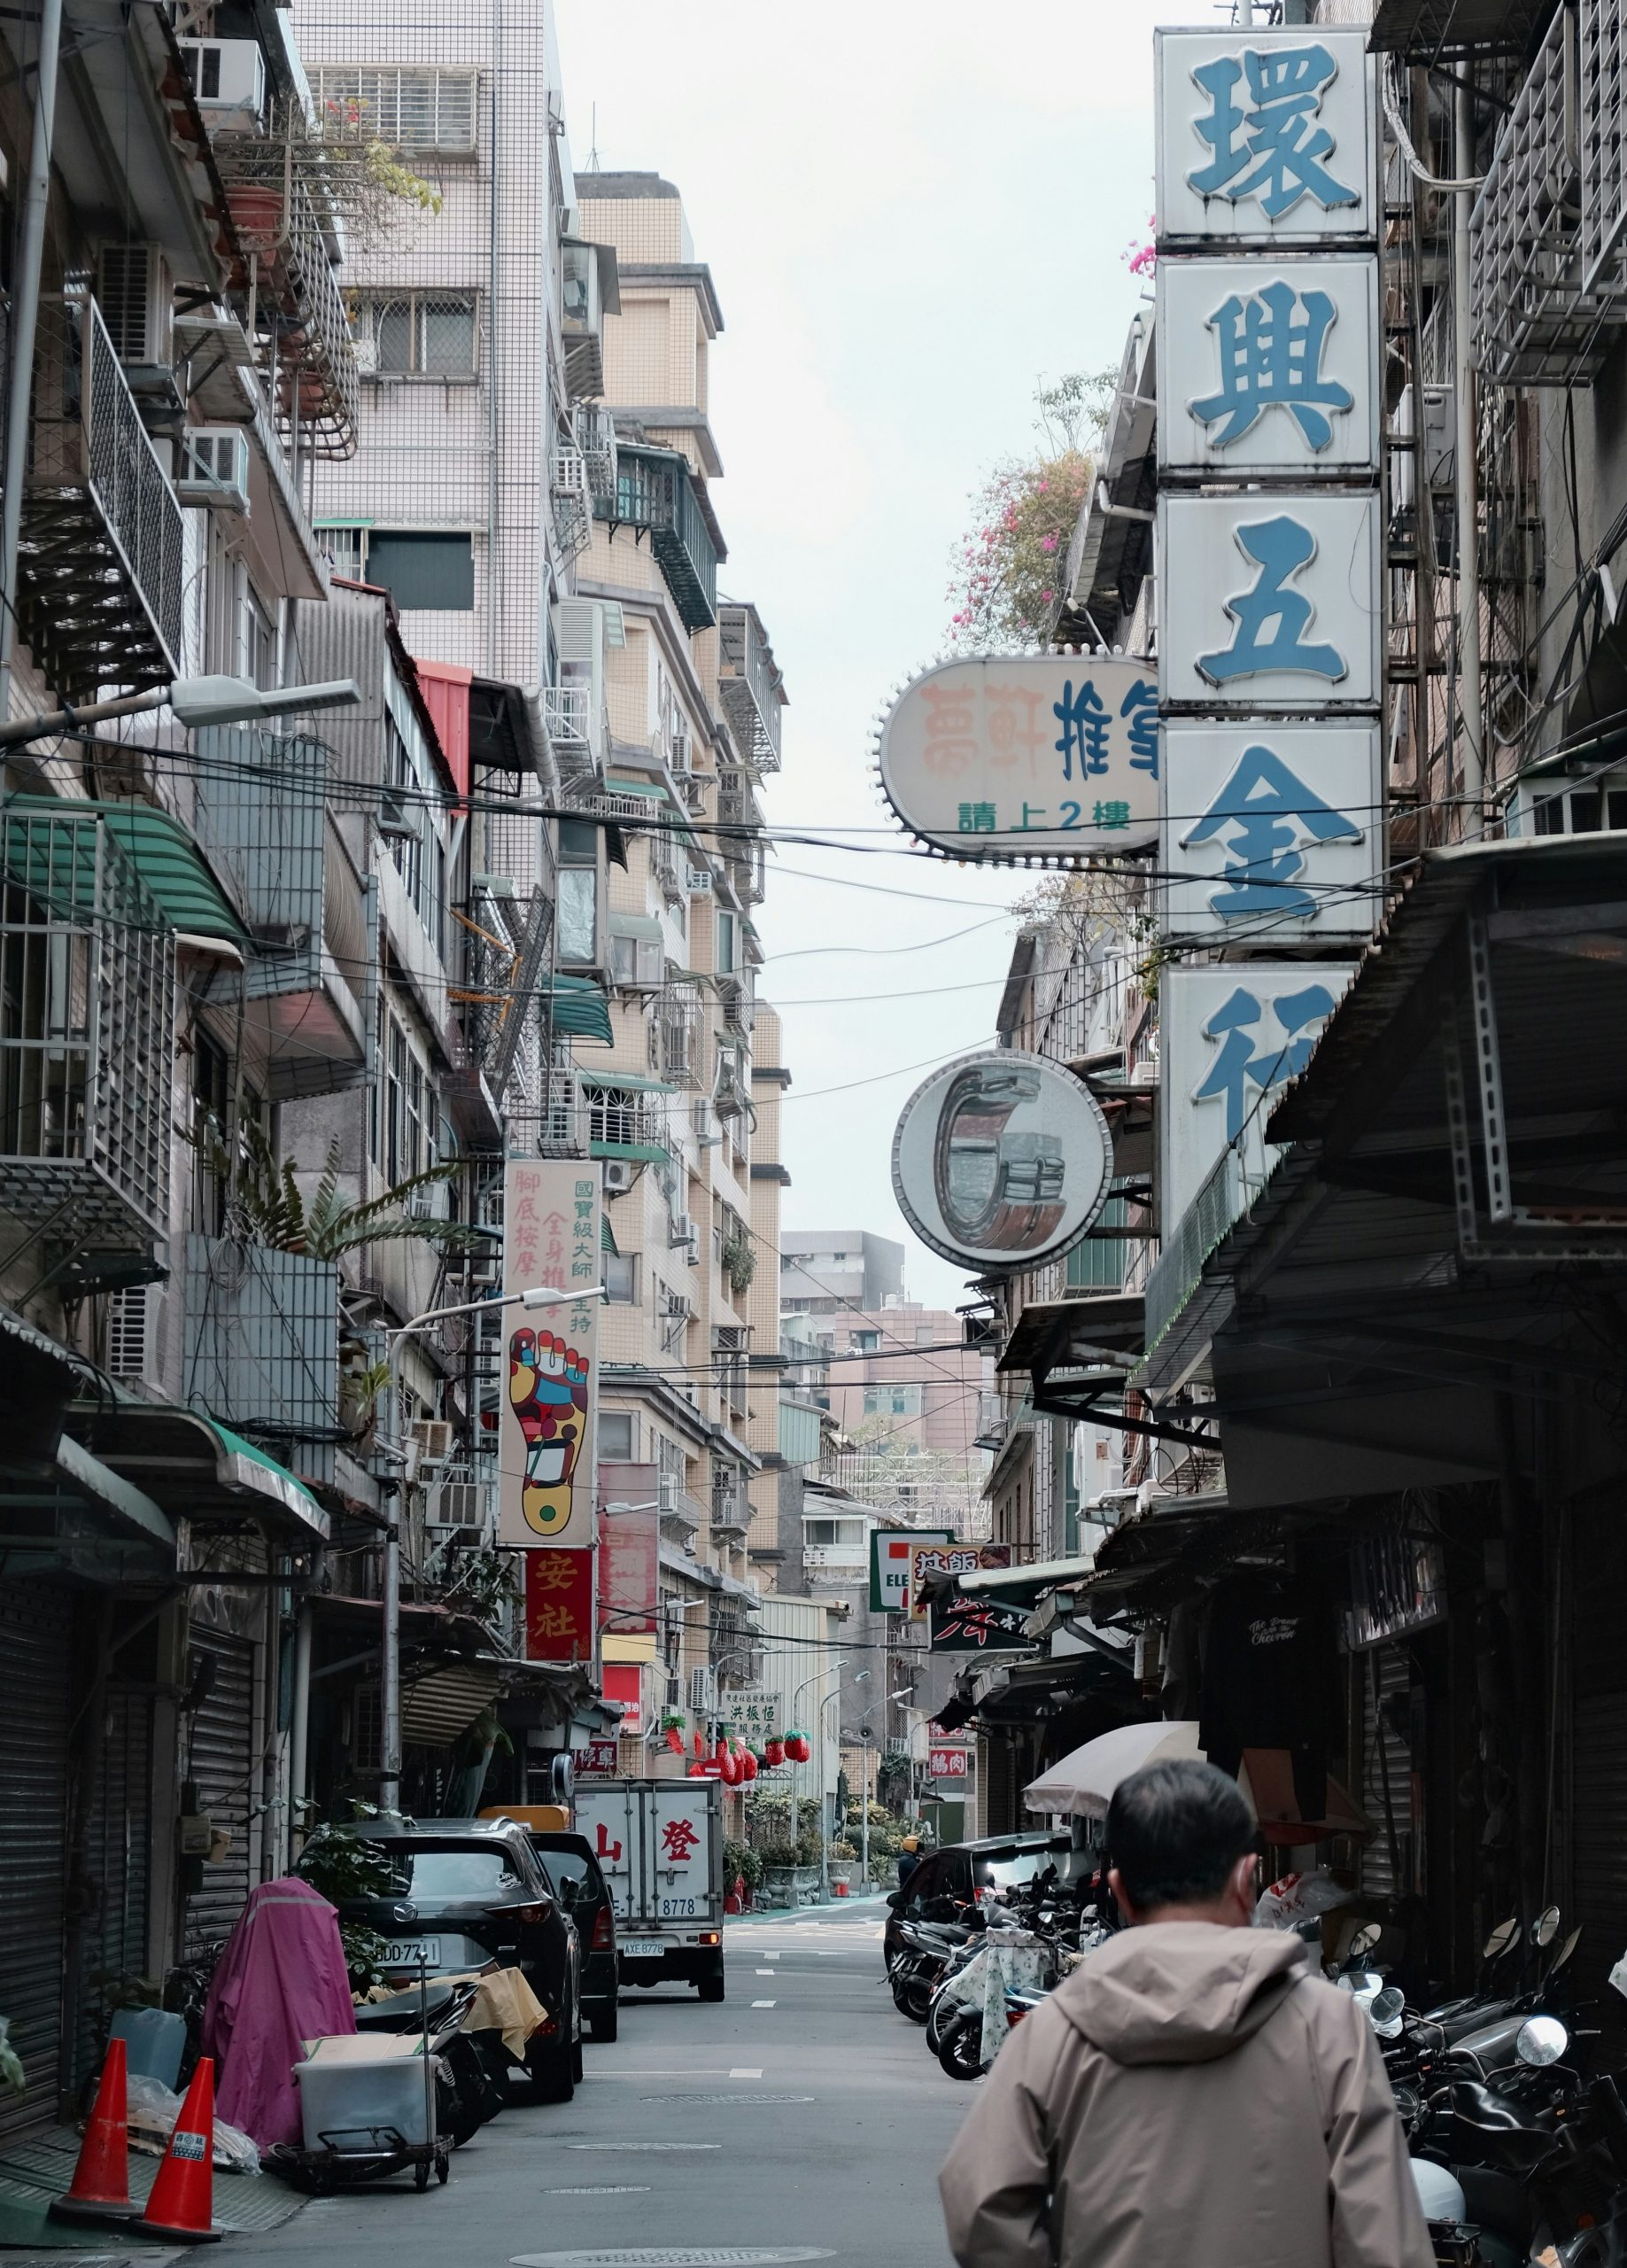 Haphazard Urbanism: The Varied Faces of Gentrification in Taipei